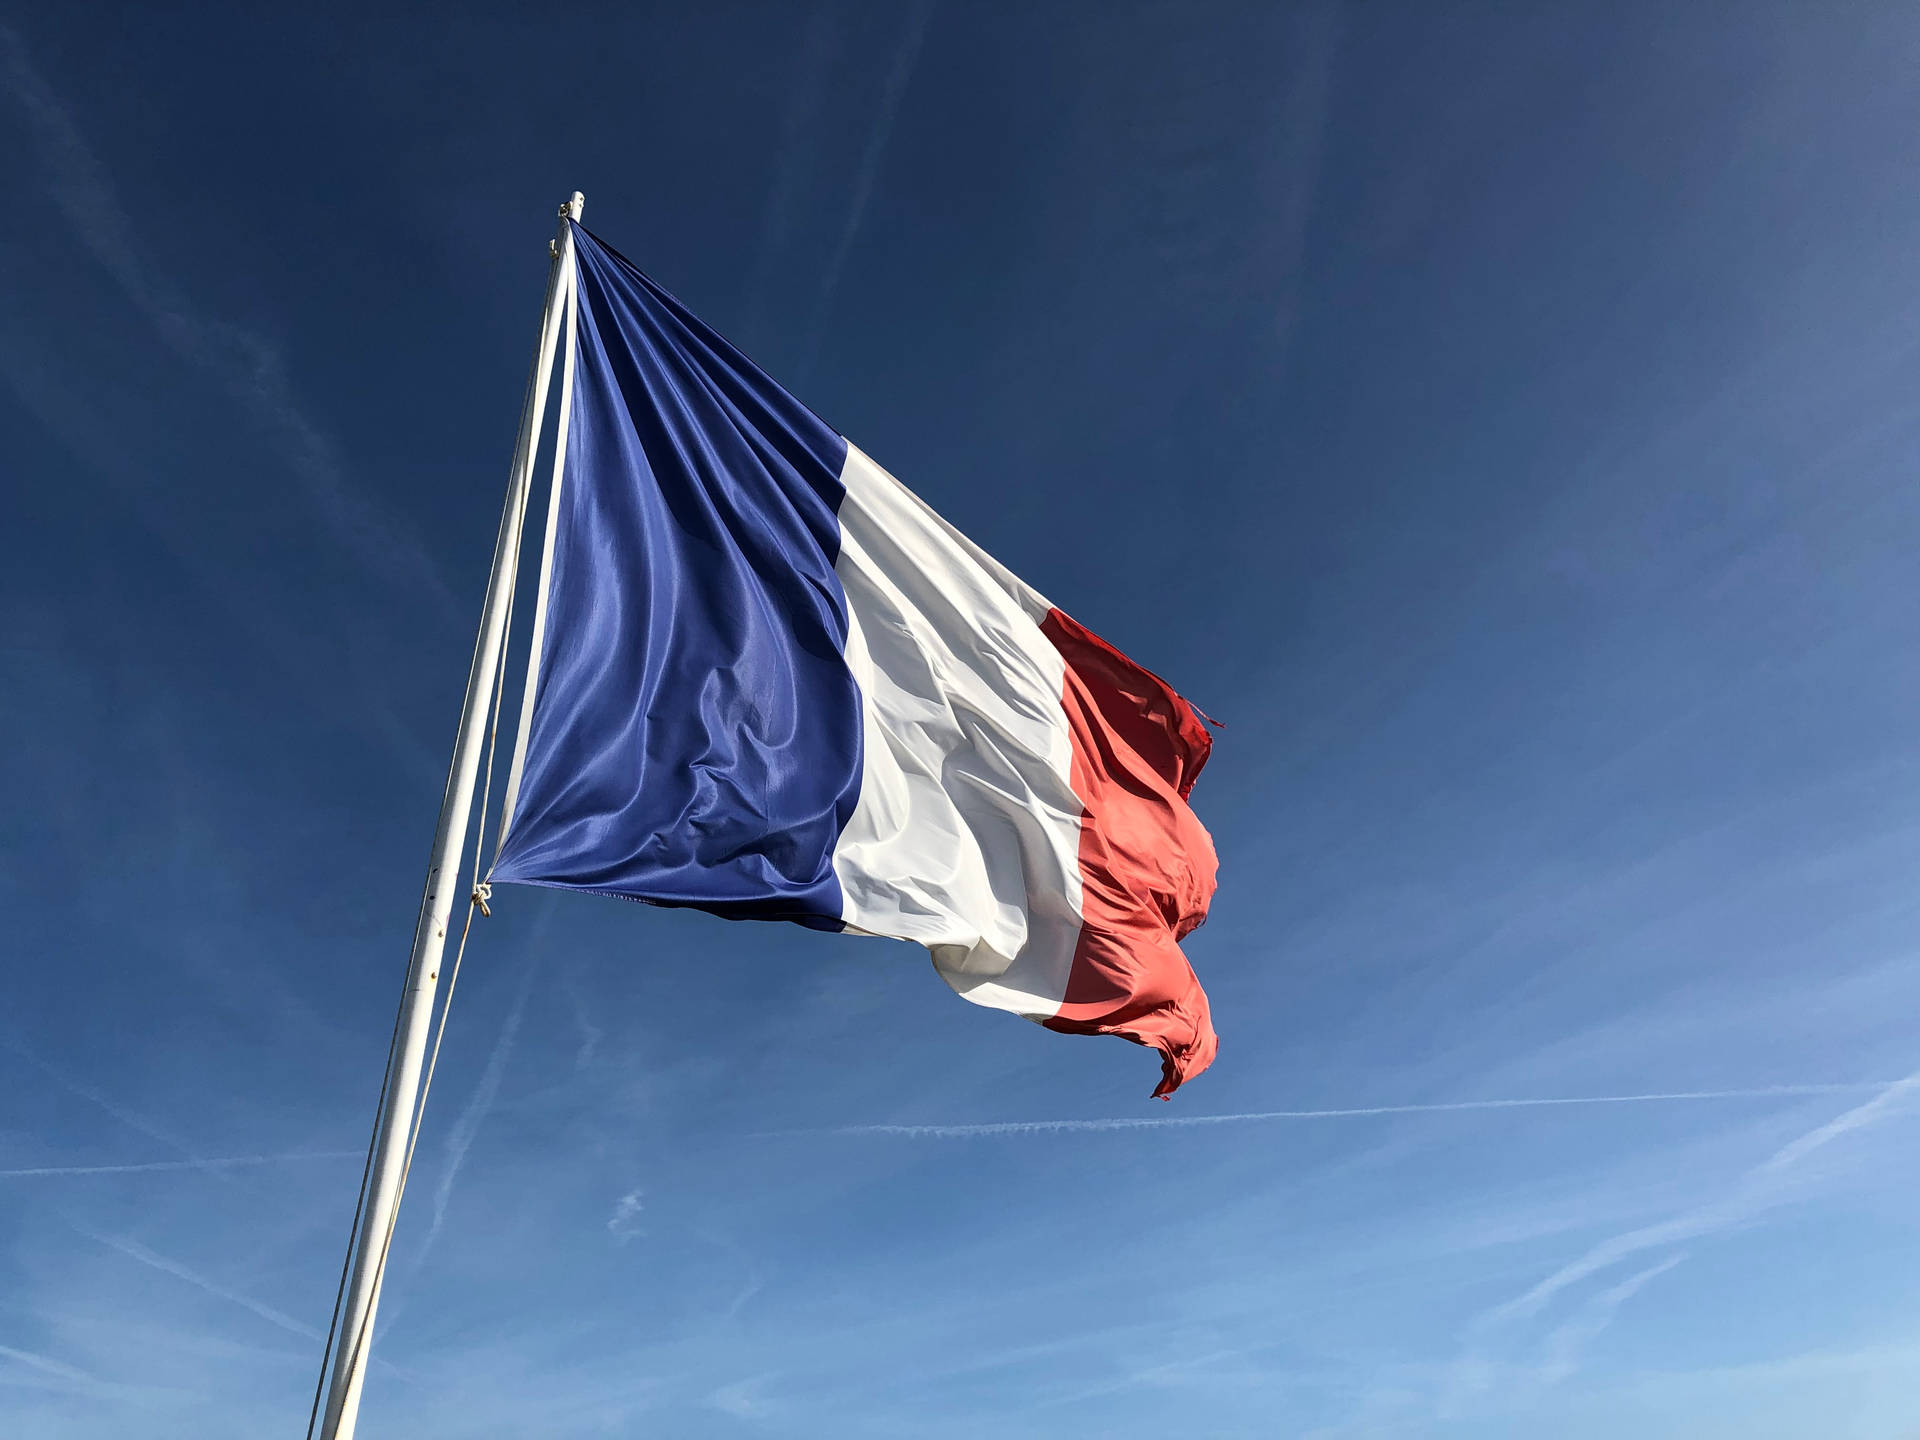 4032X3024 France Wallpaper and Background